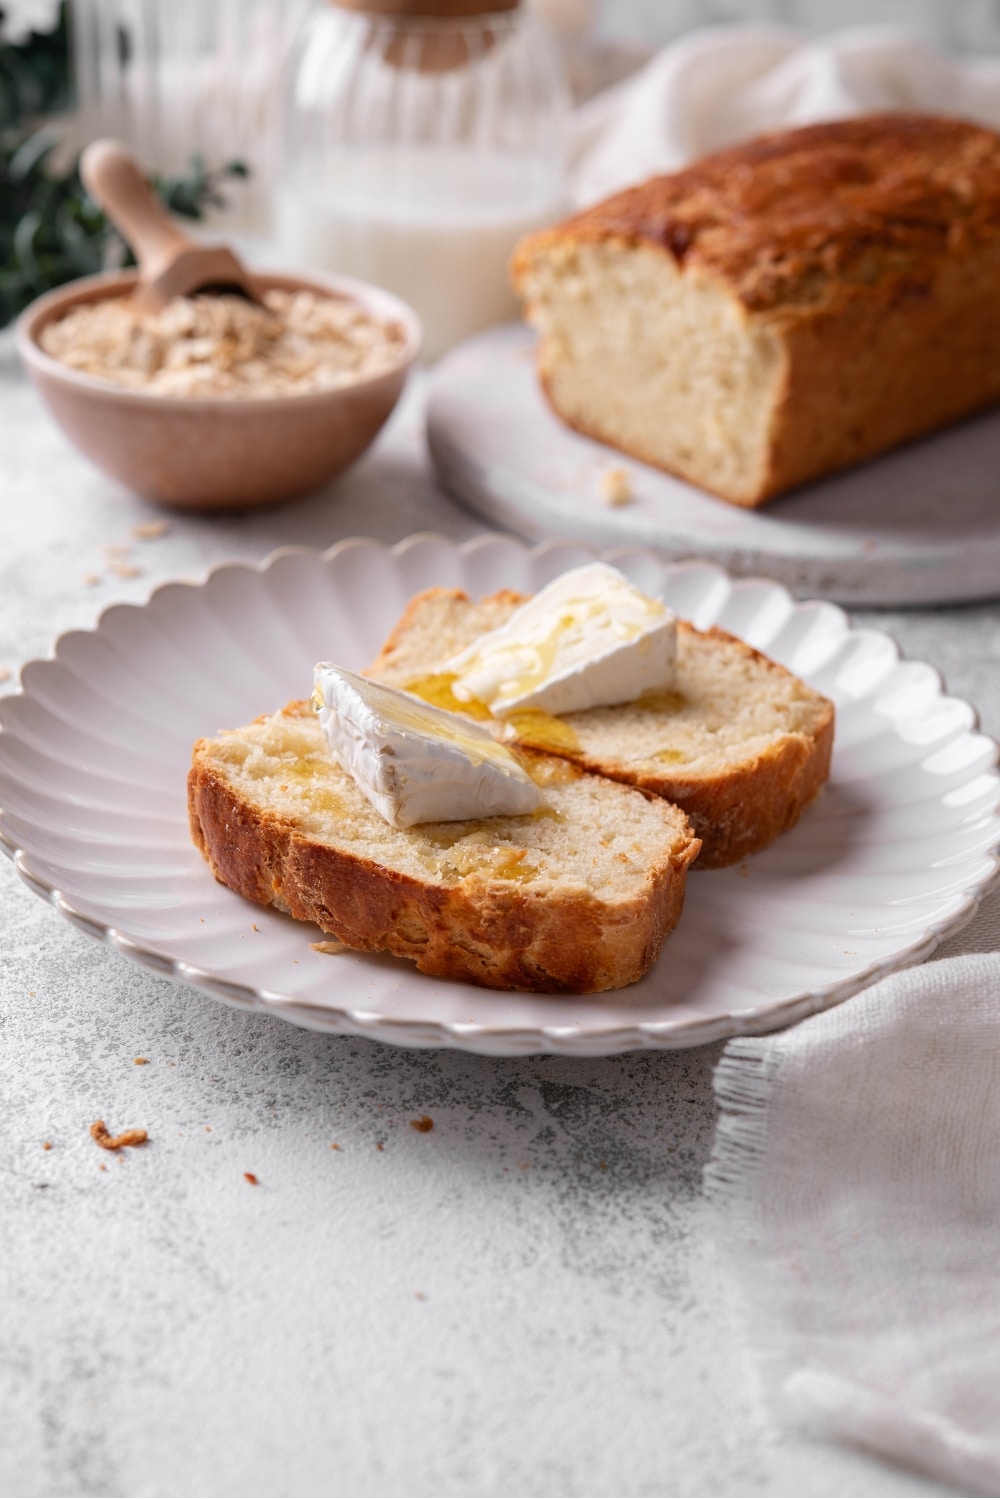 Two slices of oat bread topped with butter and drizzled with honey are on a white ceramic plate. There is an extra loaf of oat bread in the background along with a bowl of oats with a scooper inside it.